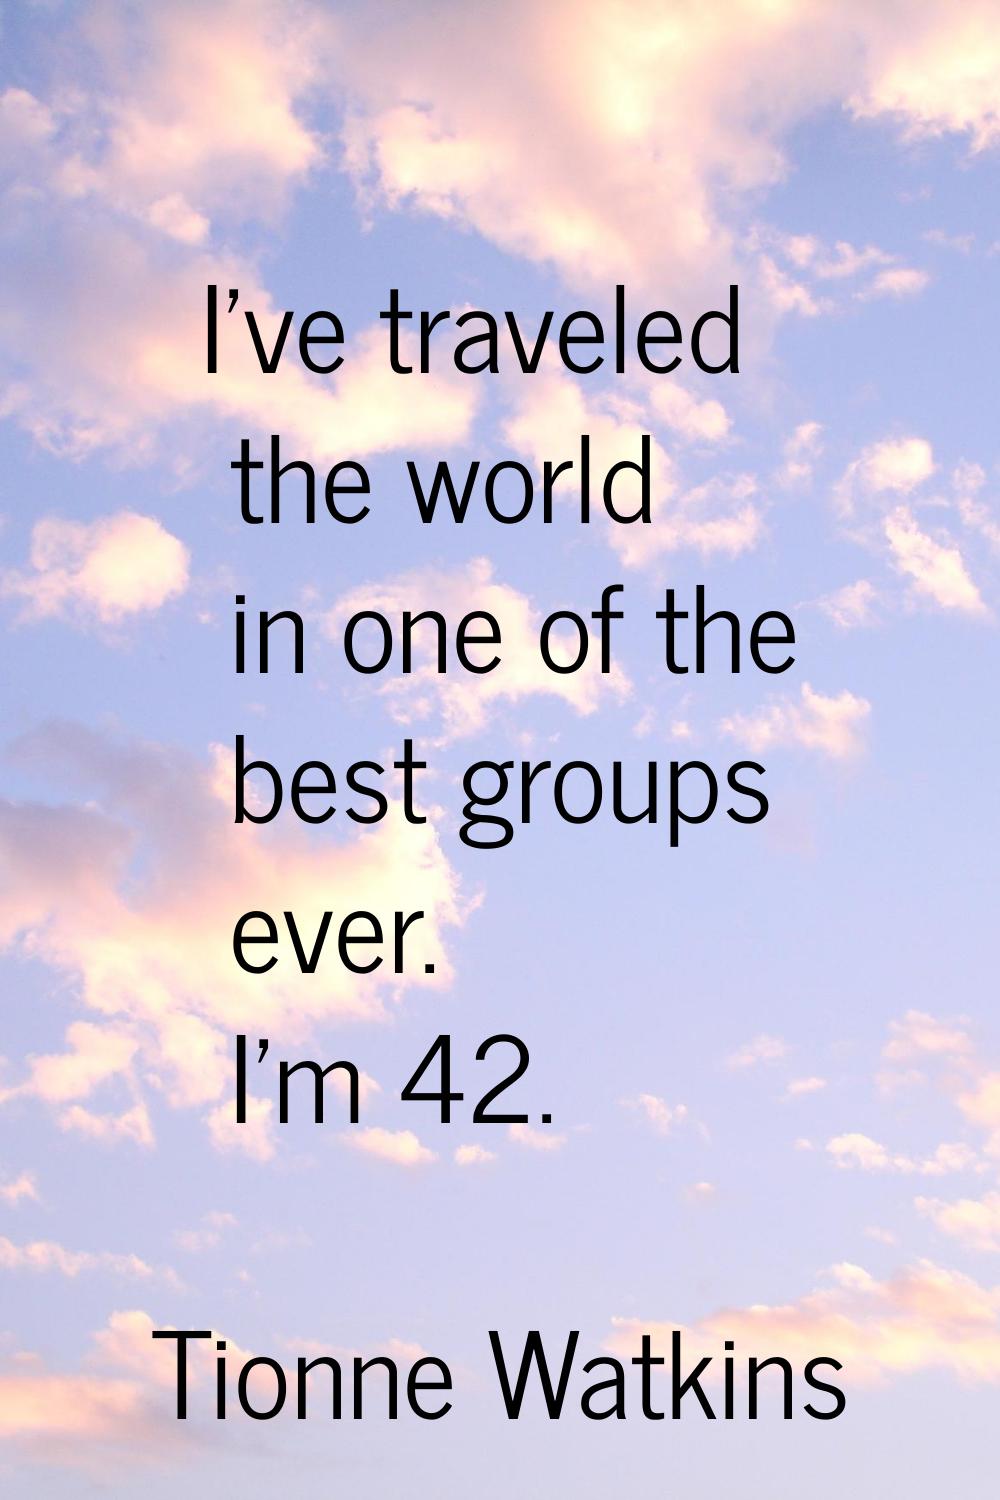 I've traveled the world in one of the best groups ever. I'm 42.